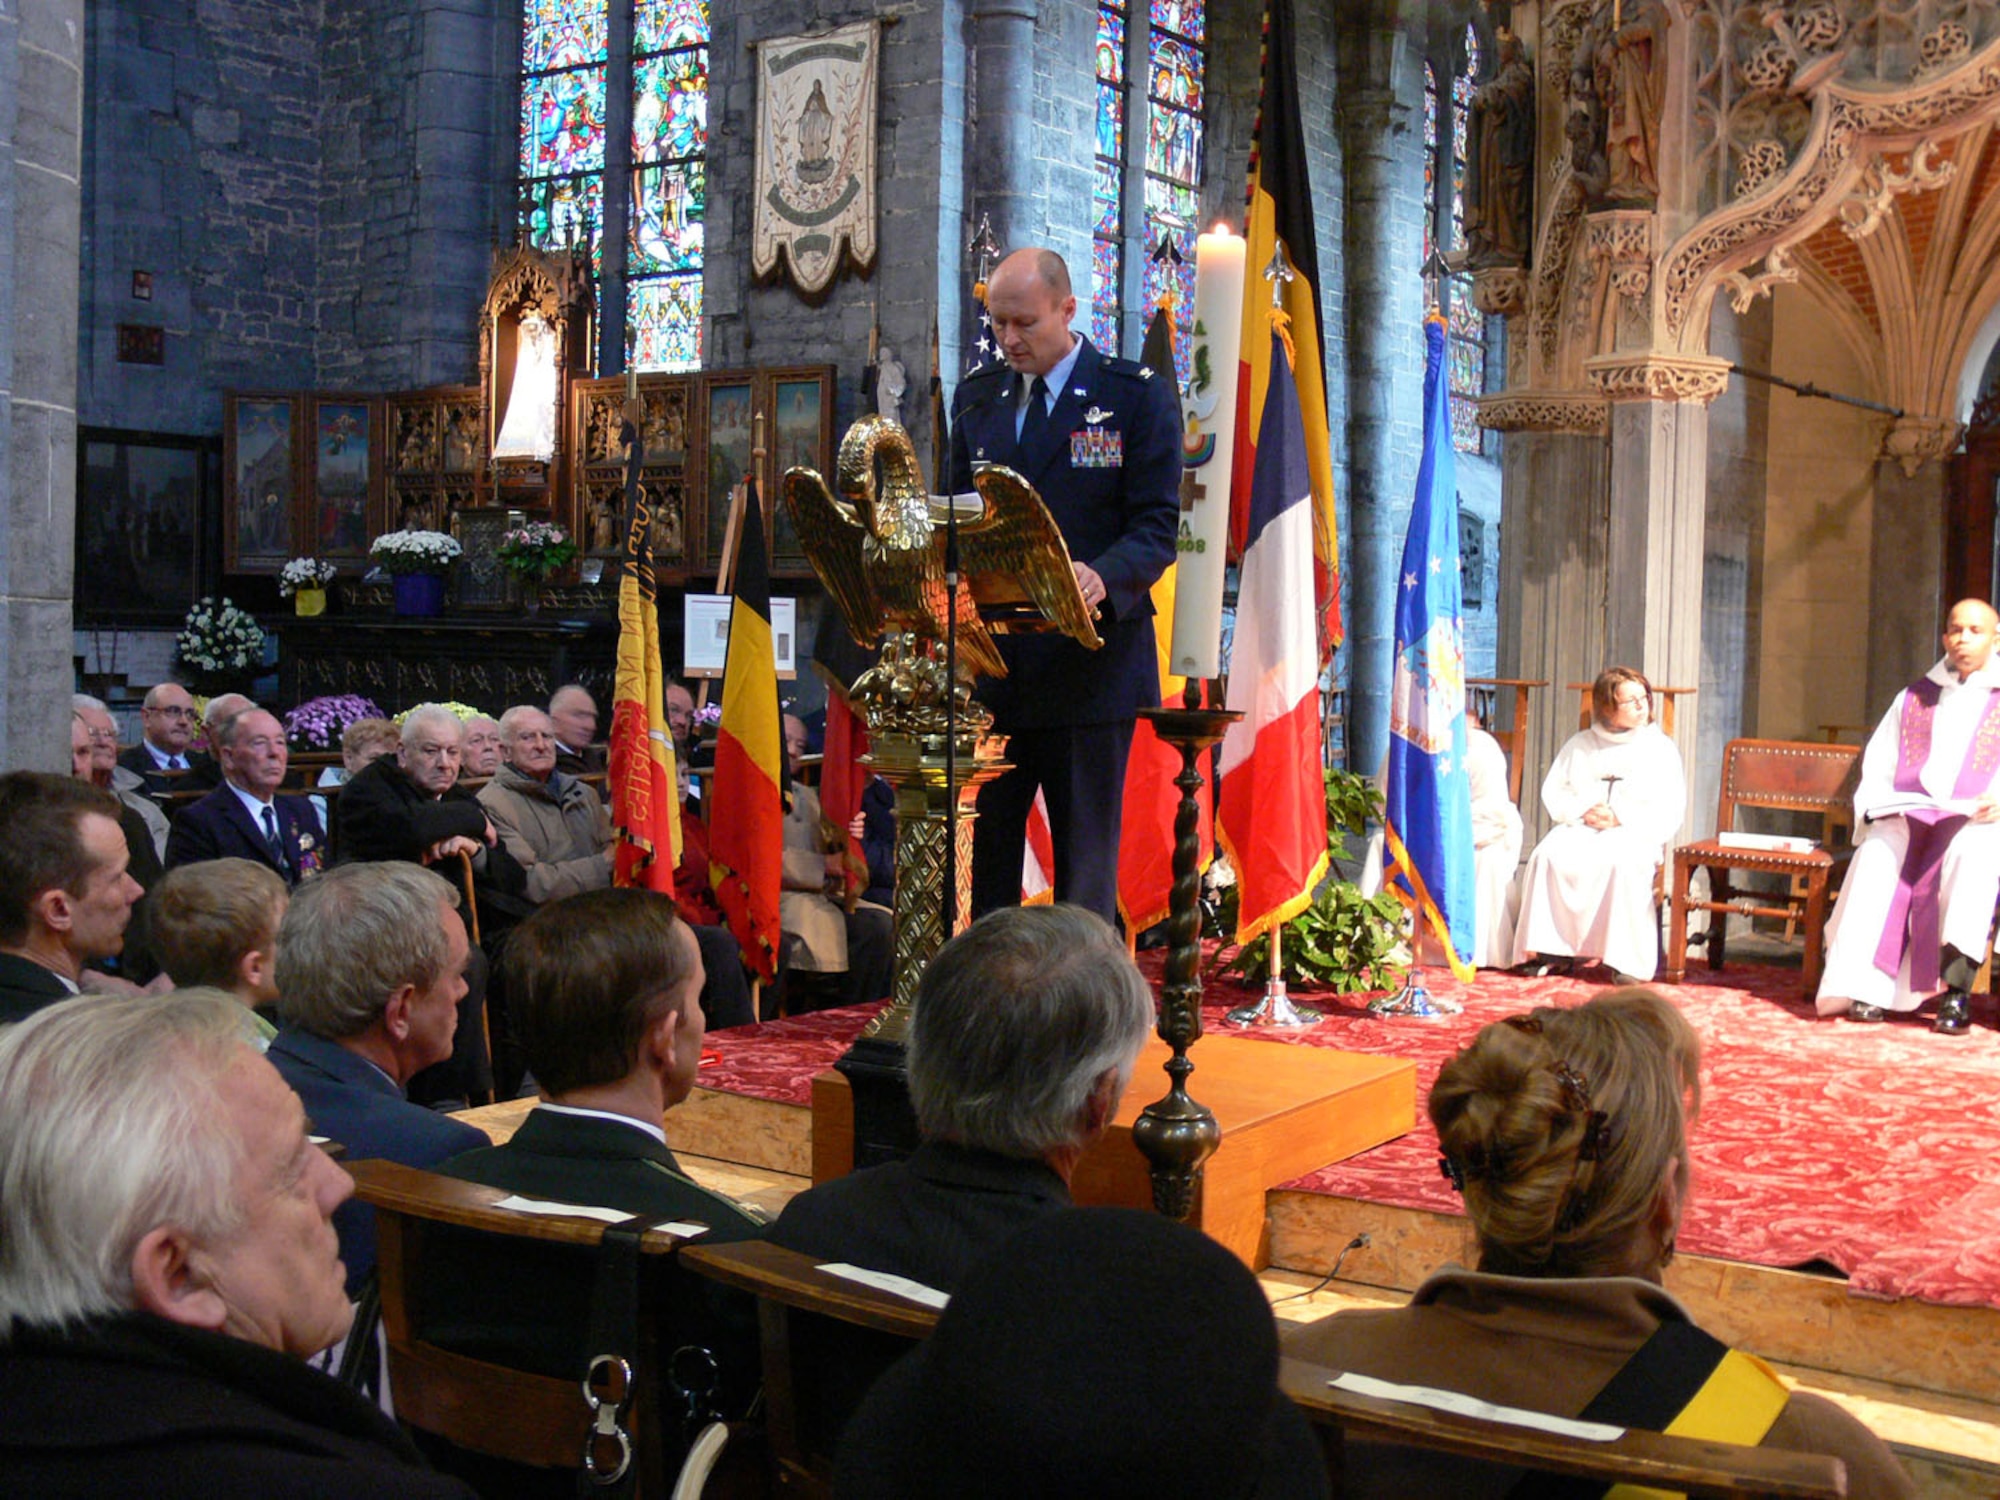 Col. Scott Manning, USAFE Warrior Prep Center commander, delivers remarks about the terrible price of war and the common bonds and enduring friendship between Europeans and Americans during Mass at the Basilica of Our Lady in Walcourt for Armistice Day. Armistice Day, celebrated as Veterans Day in the United States, commemorates the end of World War I and pays tribute to the men and women who fought or were prisoners of war in all wars. (Courtesy photo)